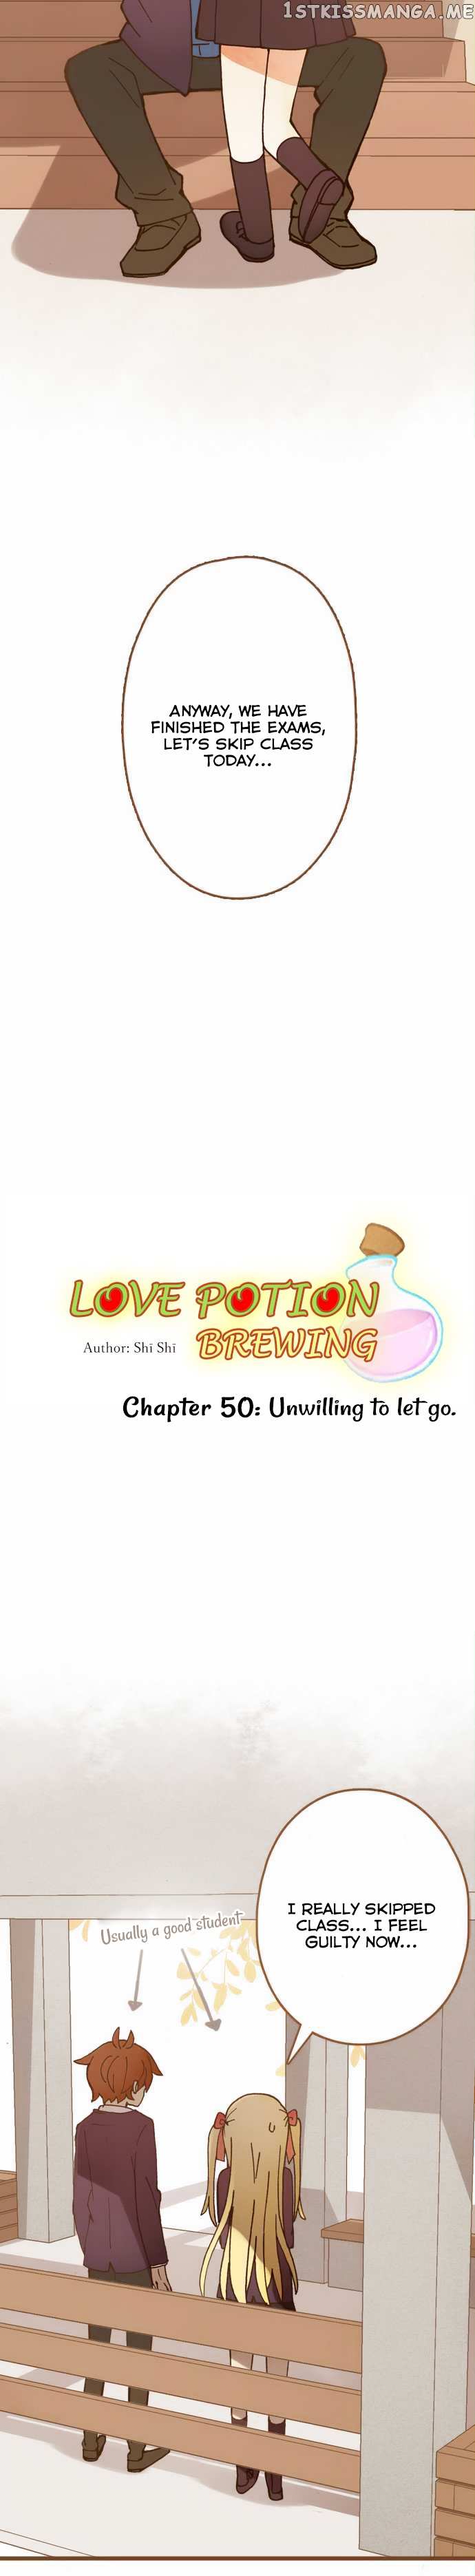 Love Potion Brewing chapter 50 - page 5